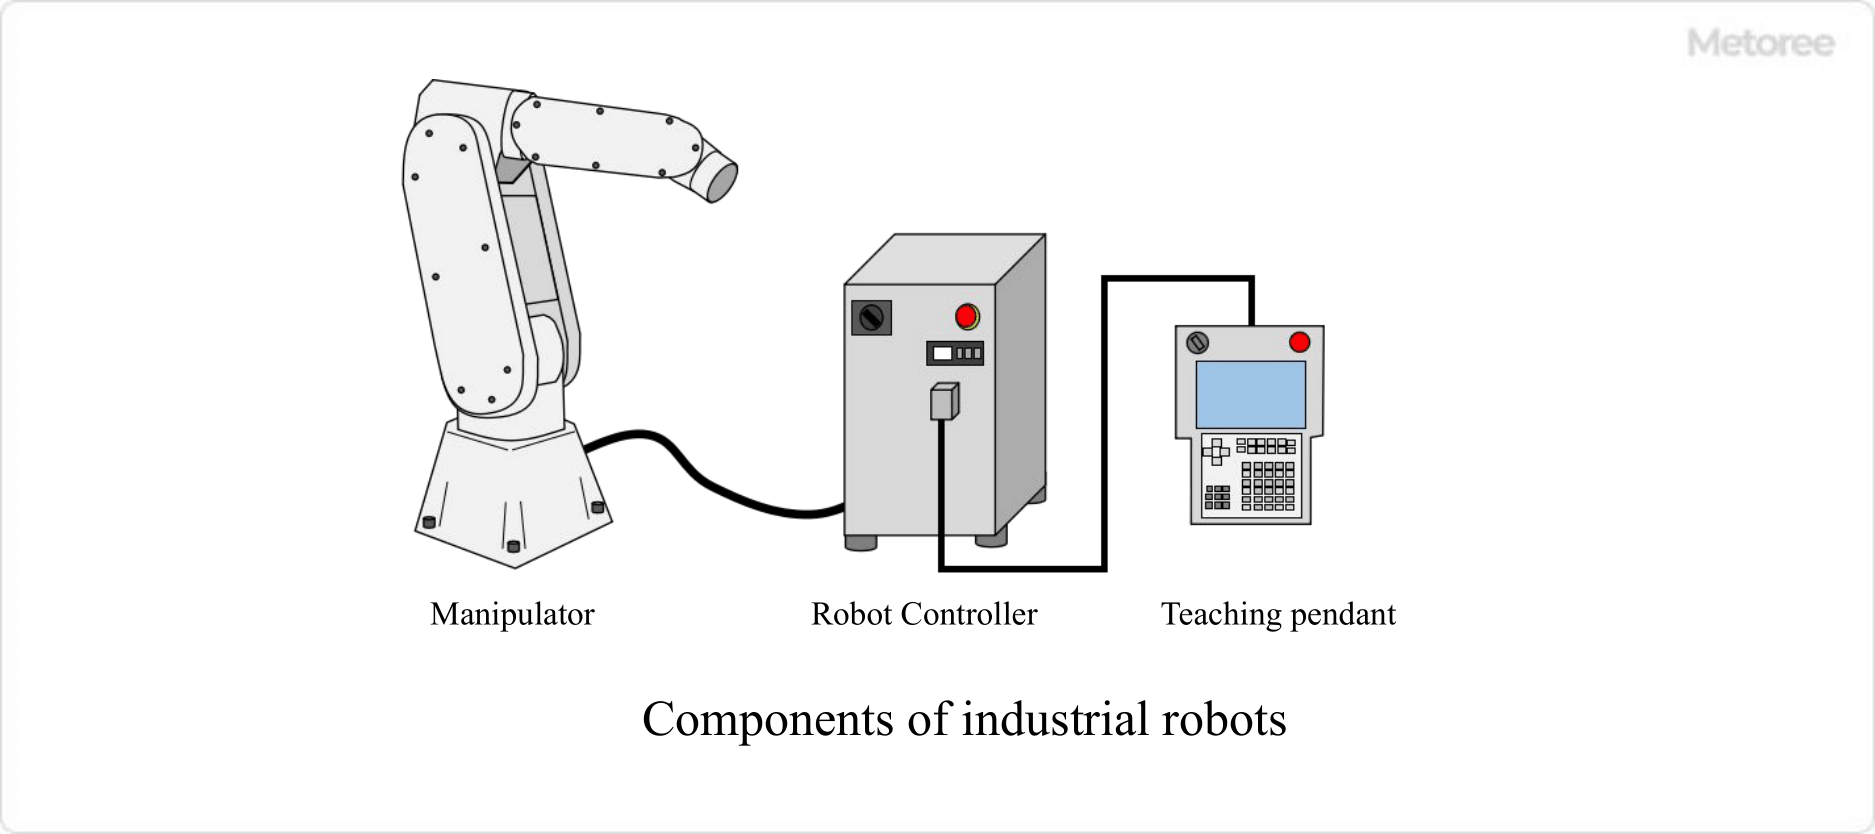 Figure 2. Components of an industrial robot